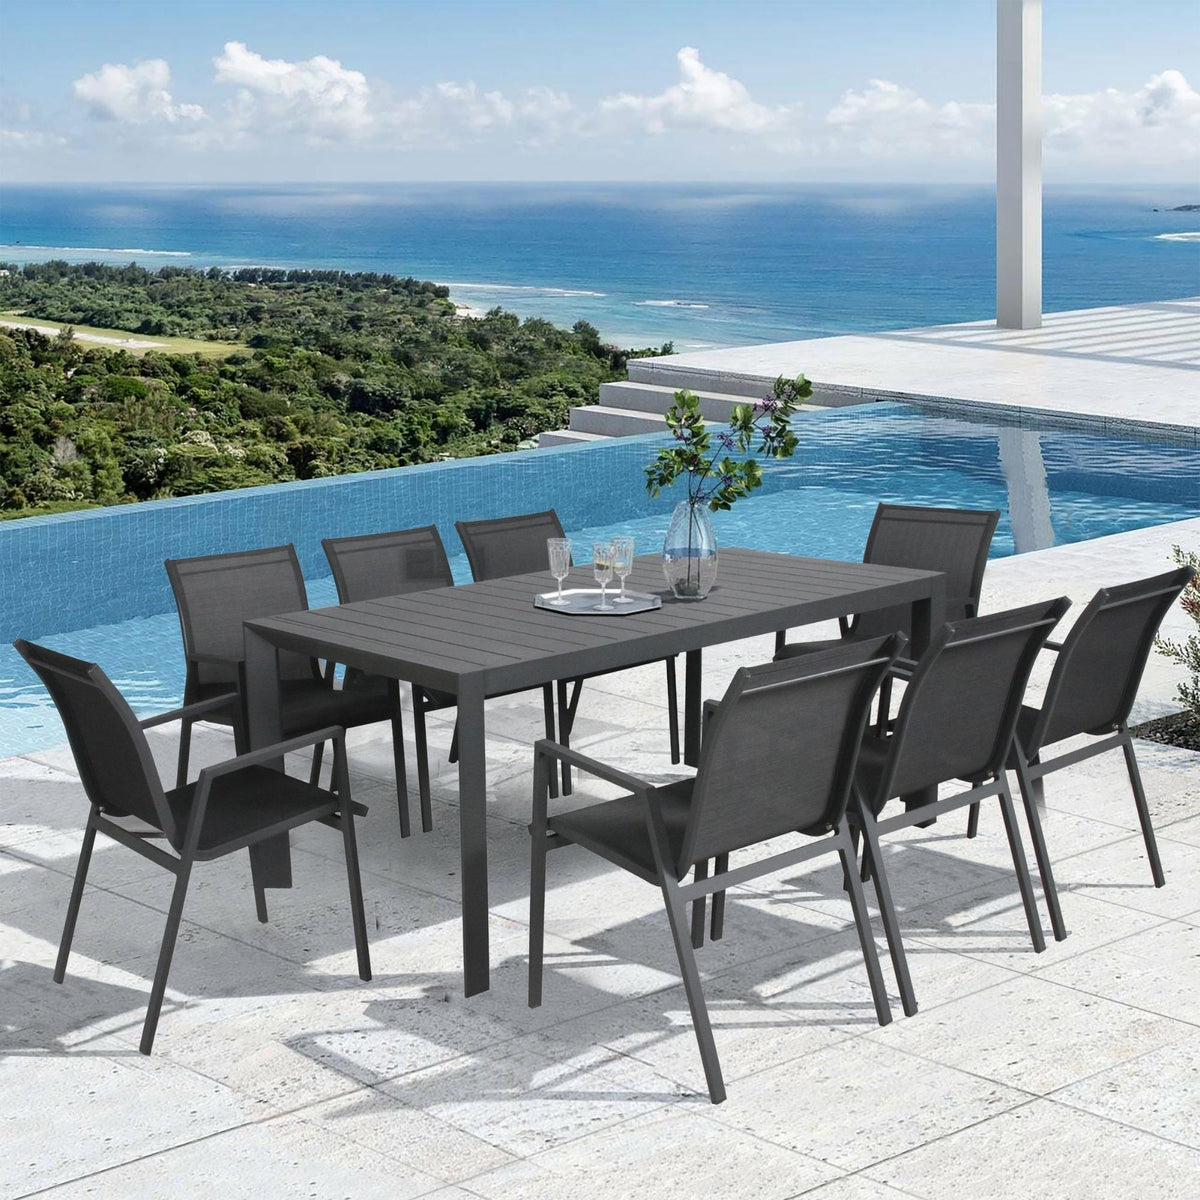 Iberia 178cm Outdoor Dining Table Charcoal 